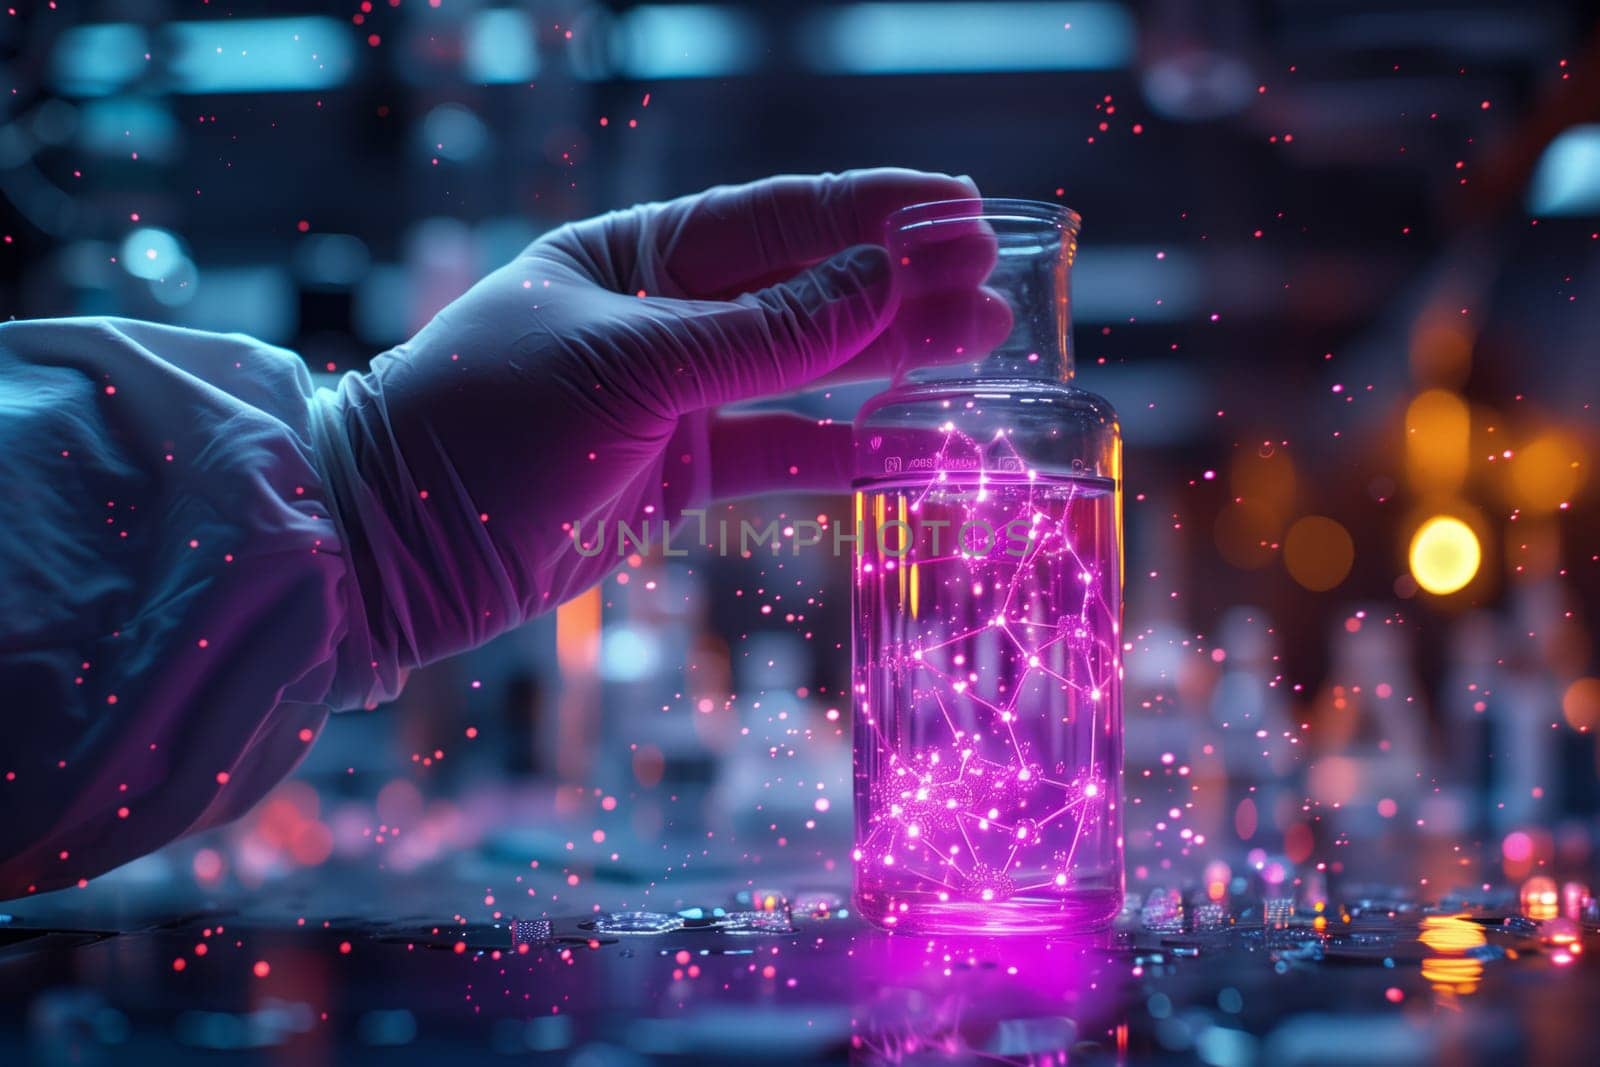 A scientist is adding a purple liquid into a beaker, creating a vivid violet hue. The visual effect lighting turns the scene into an entertaining spectacle during a performing arts event